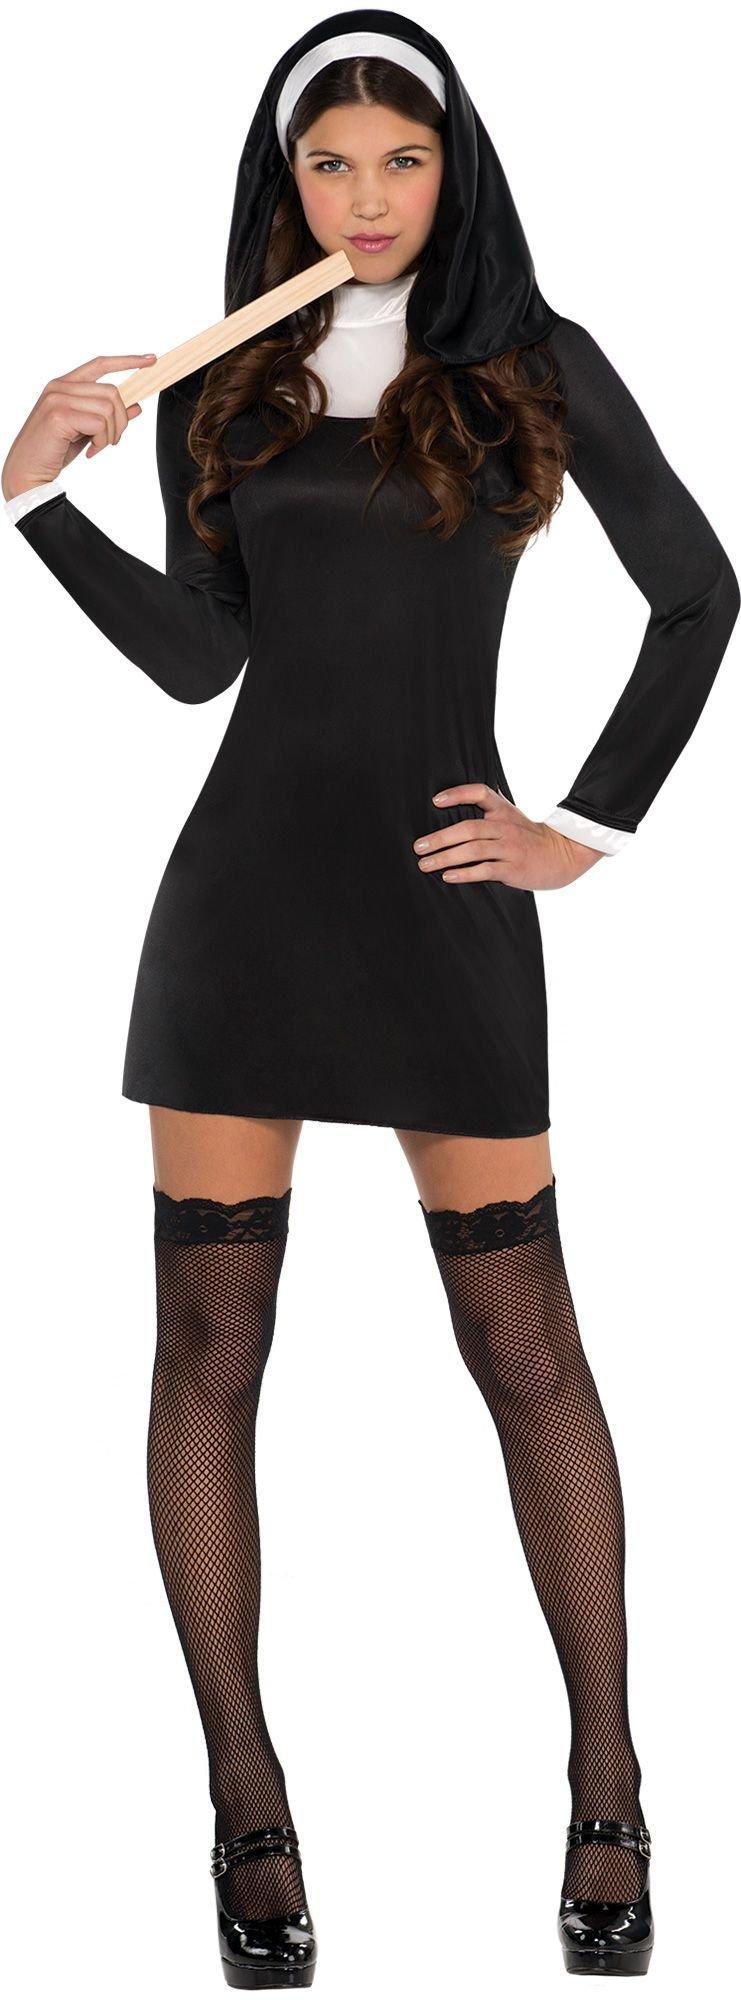 Adult Blessed Babe Nun Costume